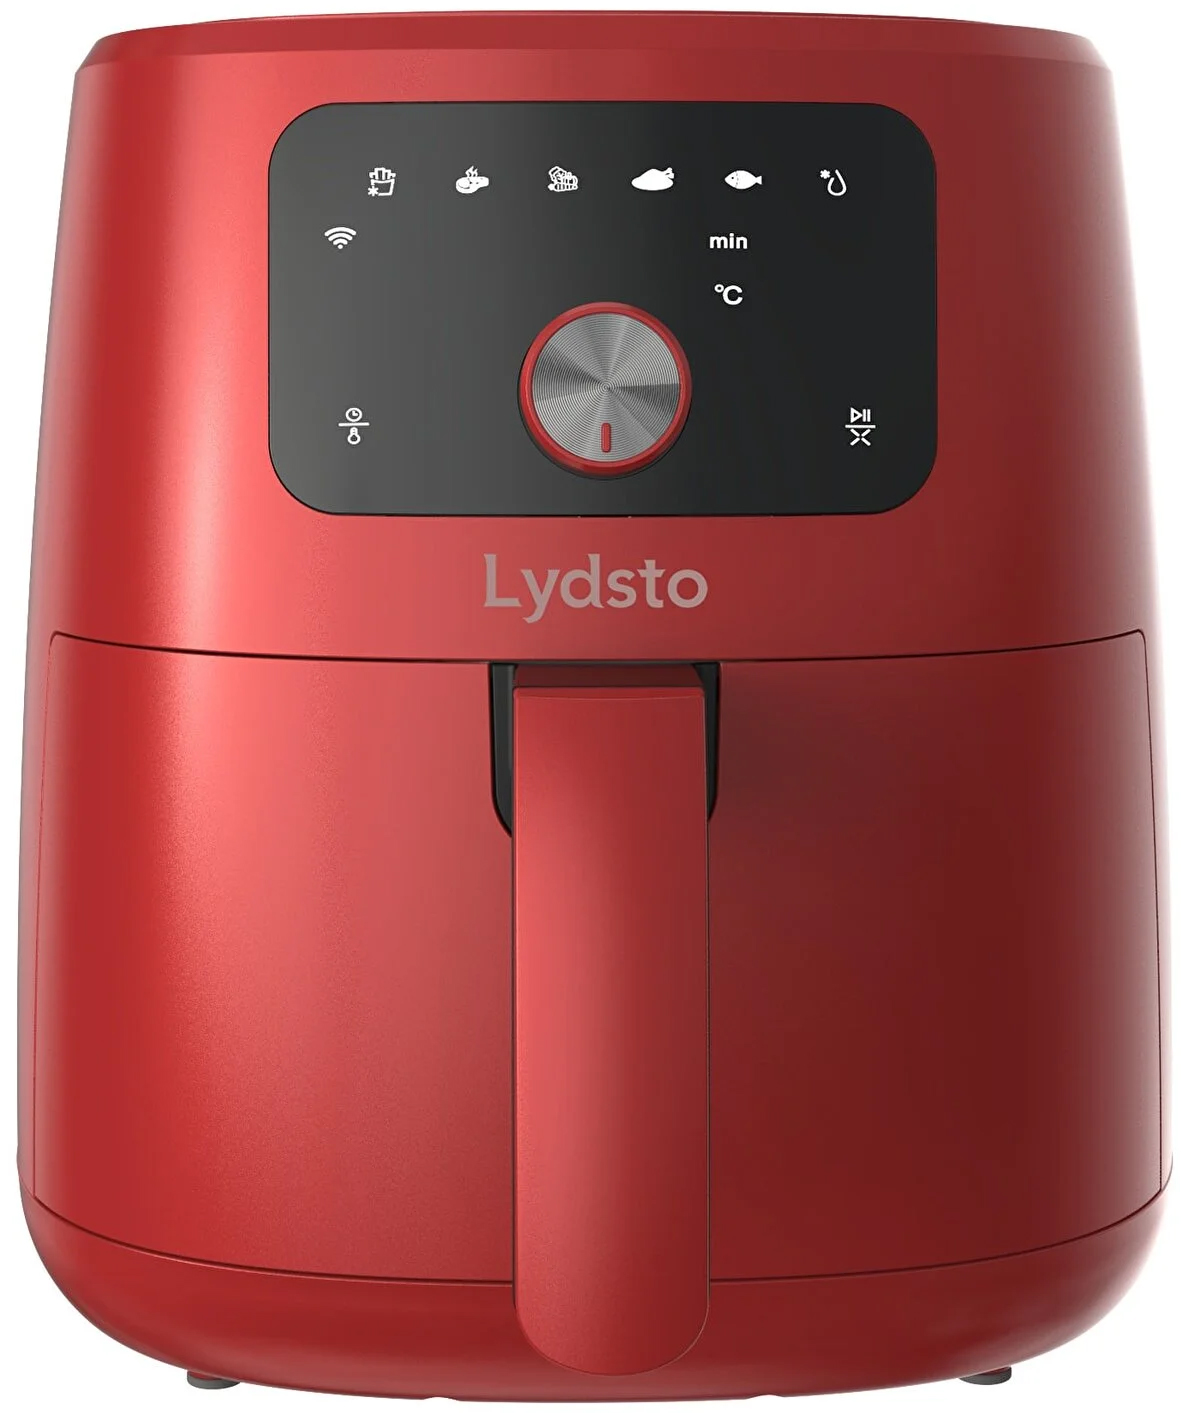 Аэрогриль Xiaomi Lydsto Smart Air Fryer 5L Red (XD-ZNKQZG03) tovala smart oven 5 in 1 air fryer oven combo air fry bake bake